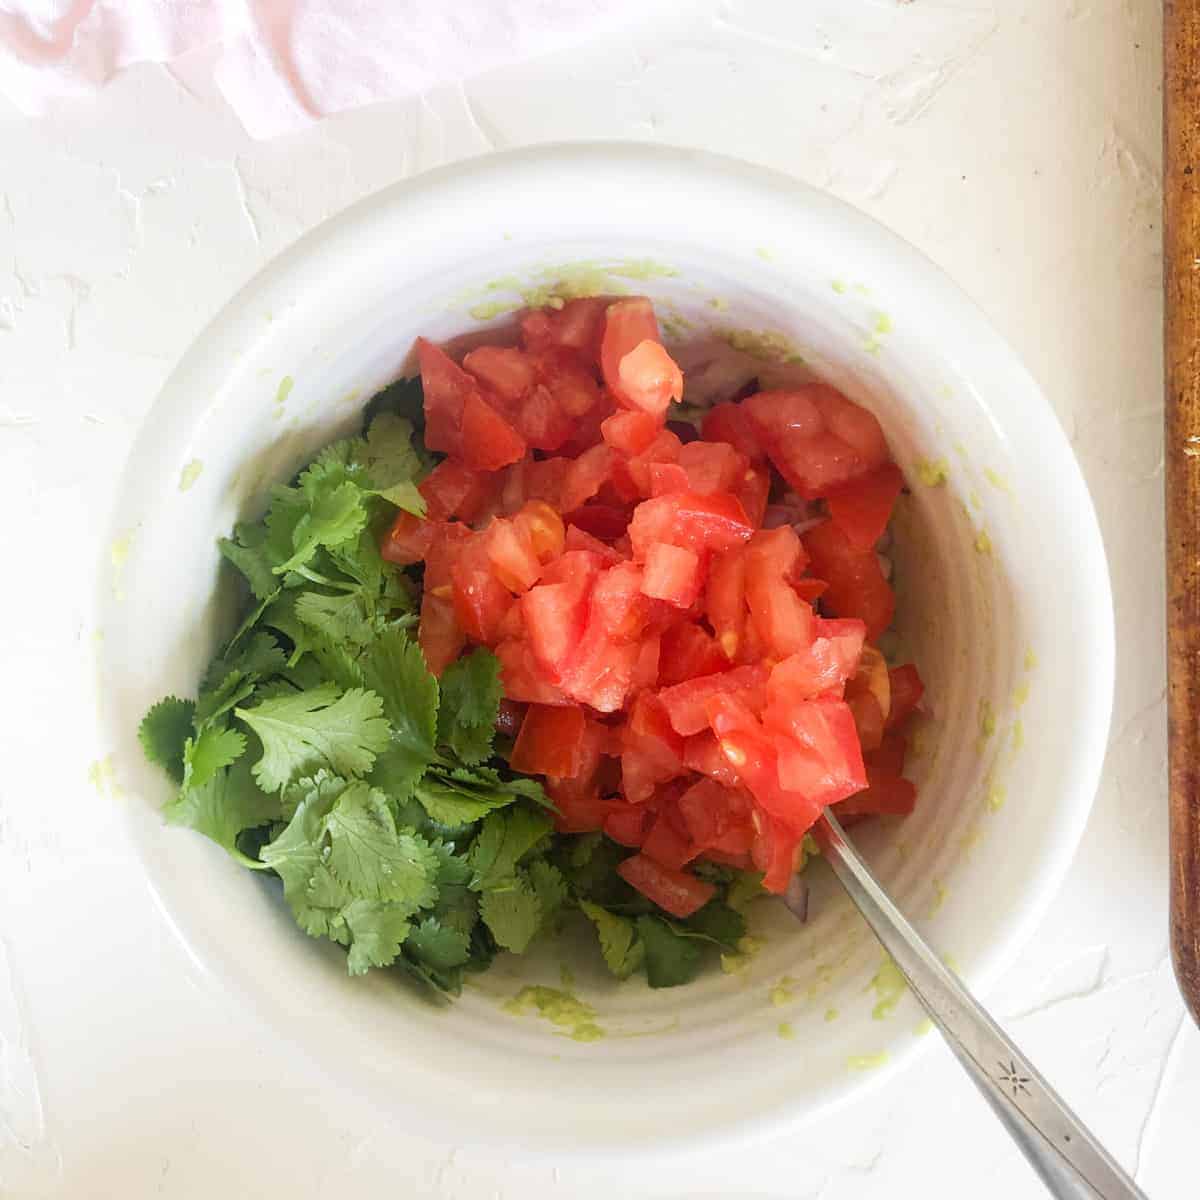 chopped cilantro leaves and diced tomatoes on top of mashed avocado in white bowl.